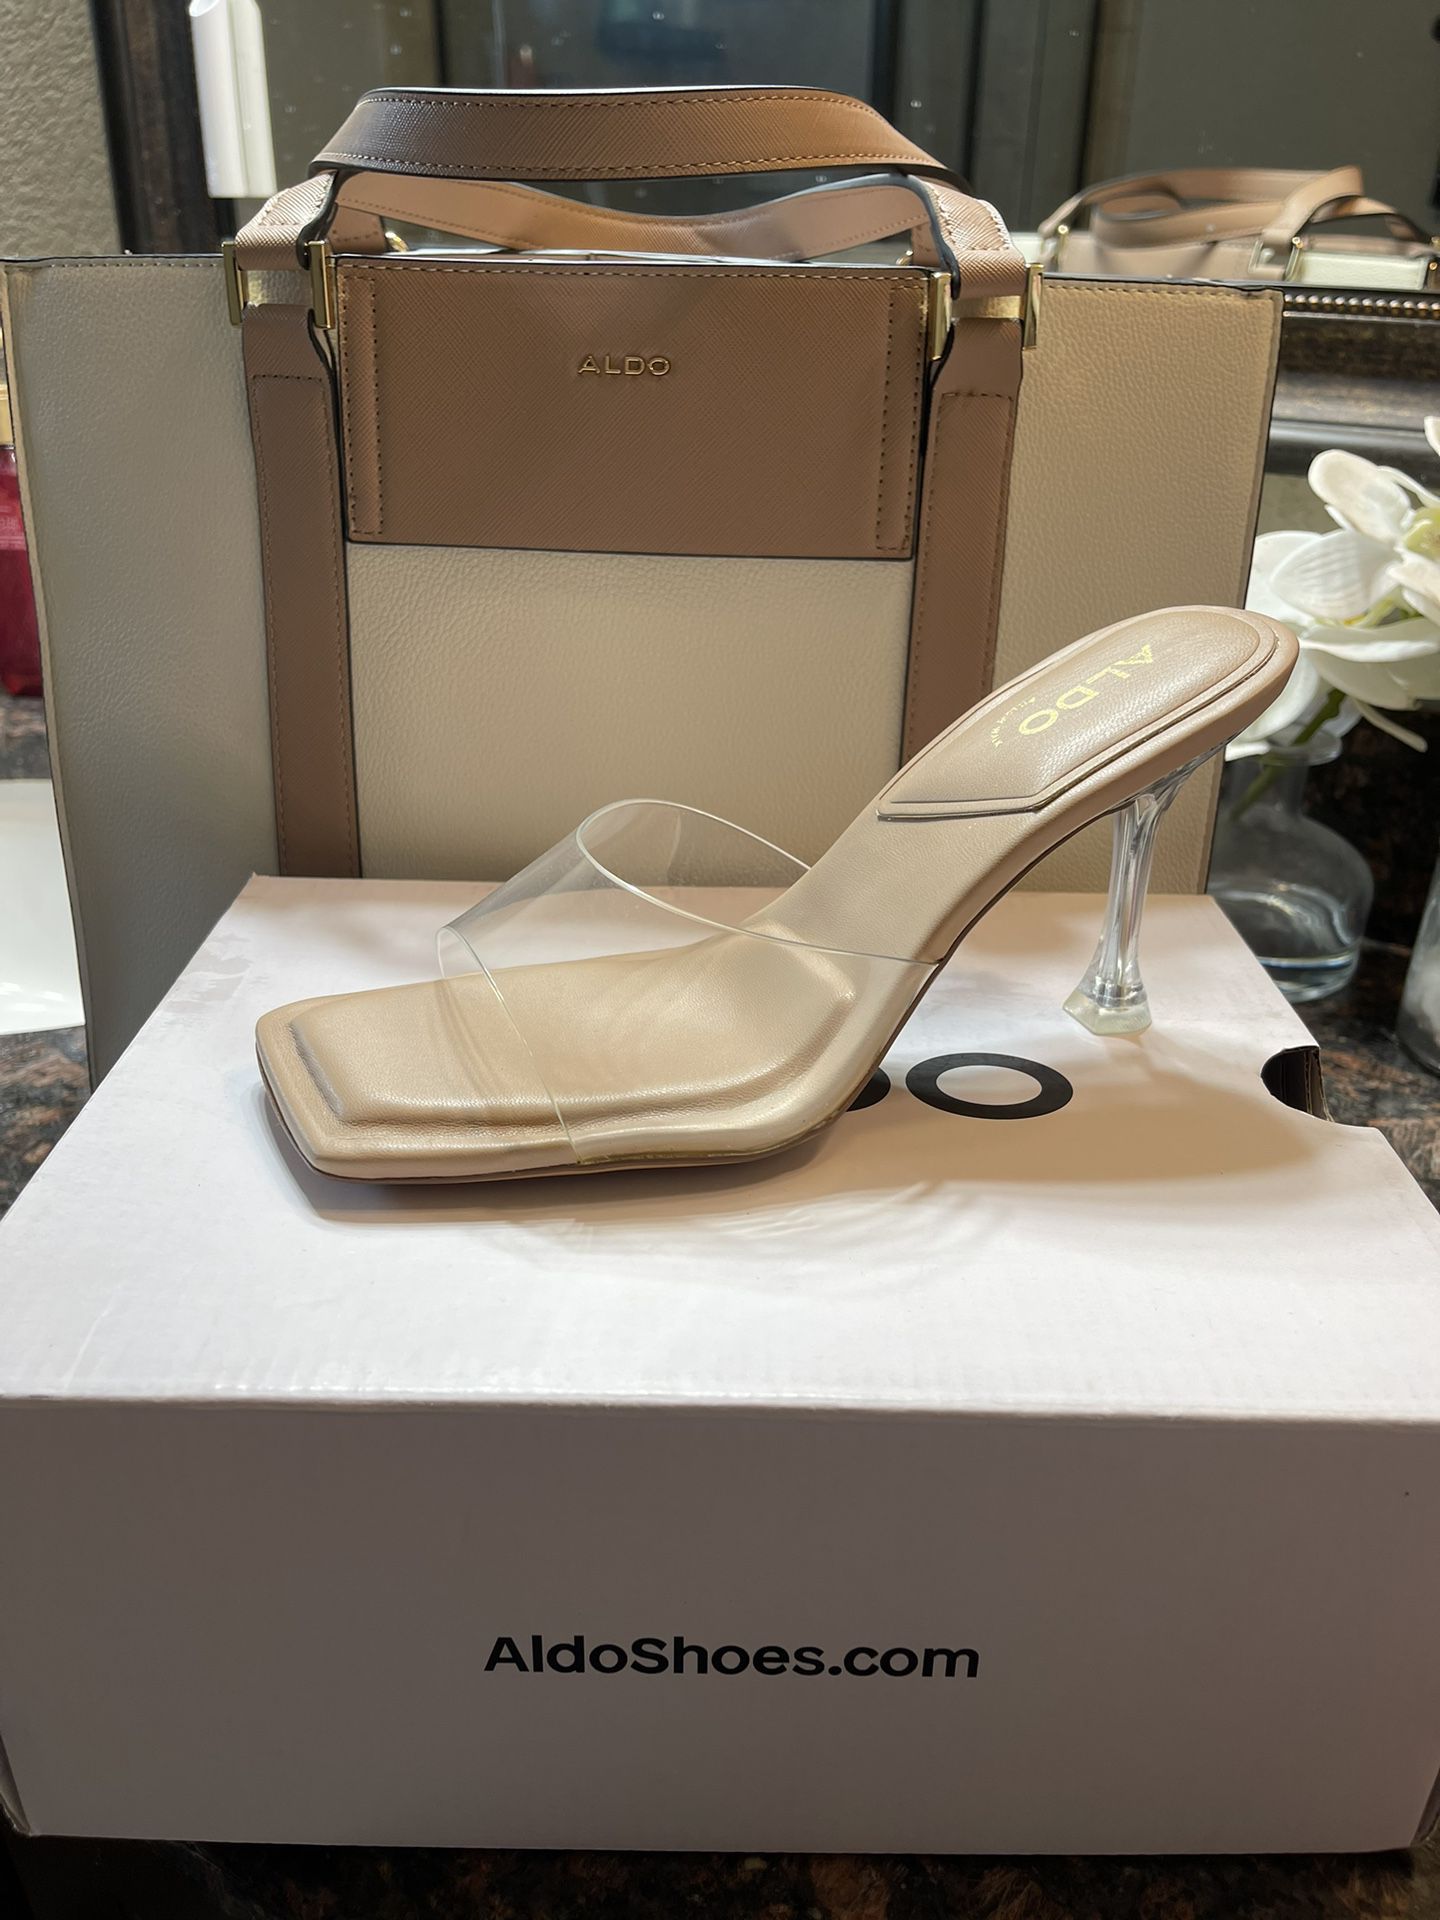 Brand New Aldo Purse and Heels $50 For Both